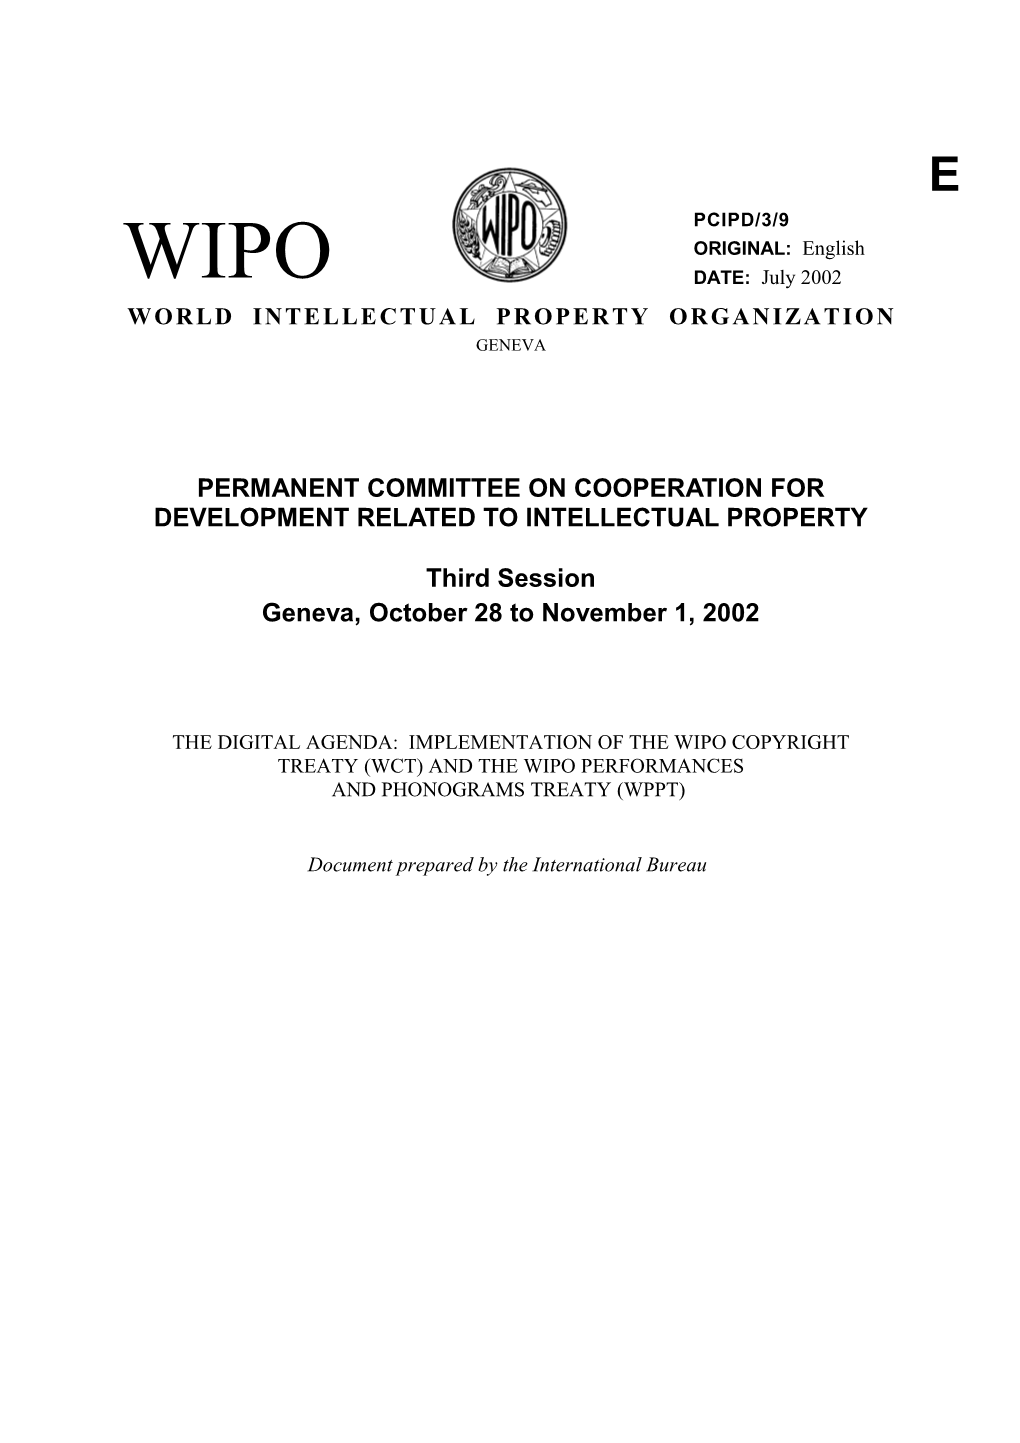 PCIPD/3/9: the Digital Agenda: Implementation of the WIPO Copyright Treaty (WCT) and The